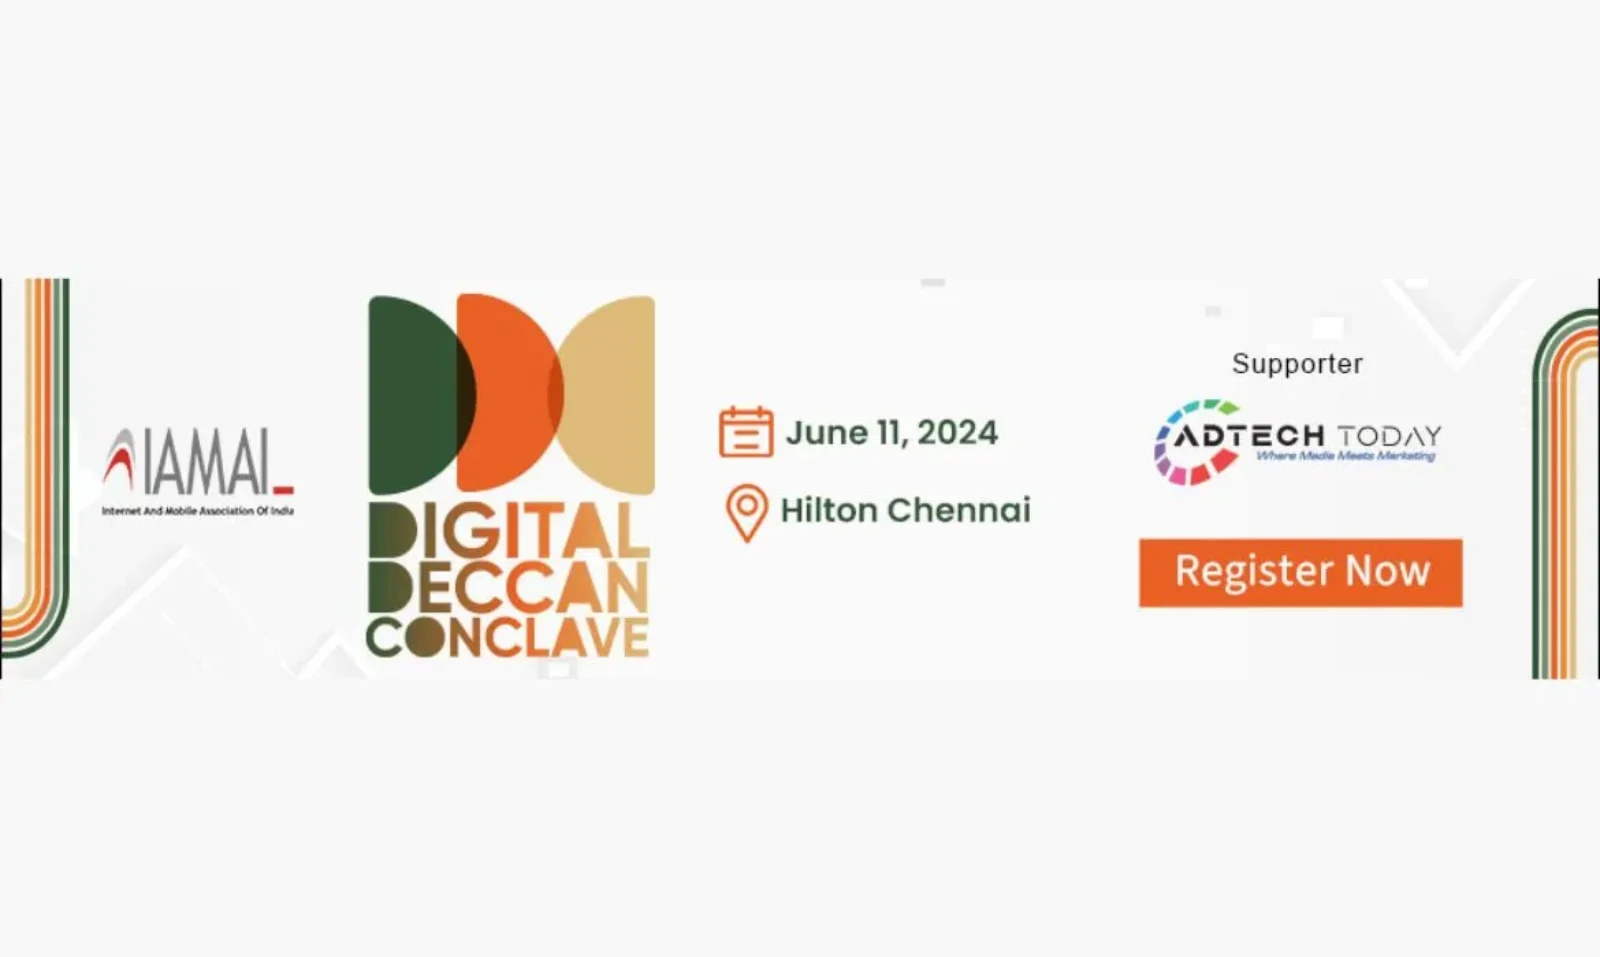 Digital deccan conclave, IAMAI, internet and mobile association of India, conference, digital excellence, business landscape, southern india, marketing, industry stalwarts, speakers, innovation, cutting edge, networking, brand strategies, digital wonders, creative,